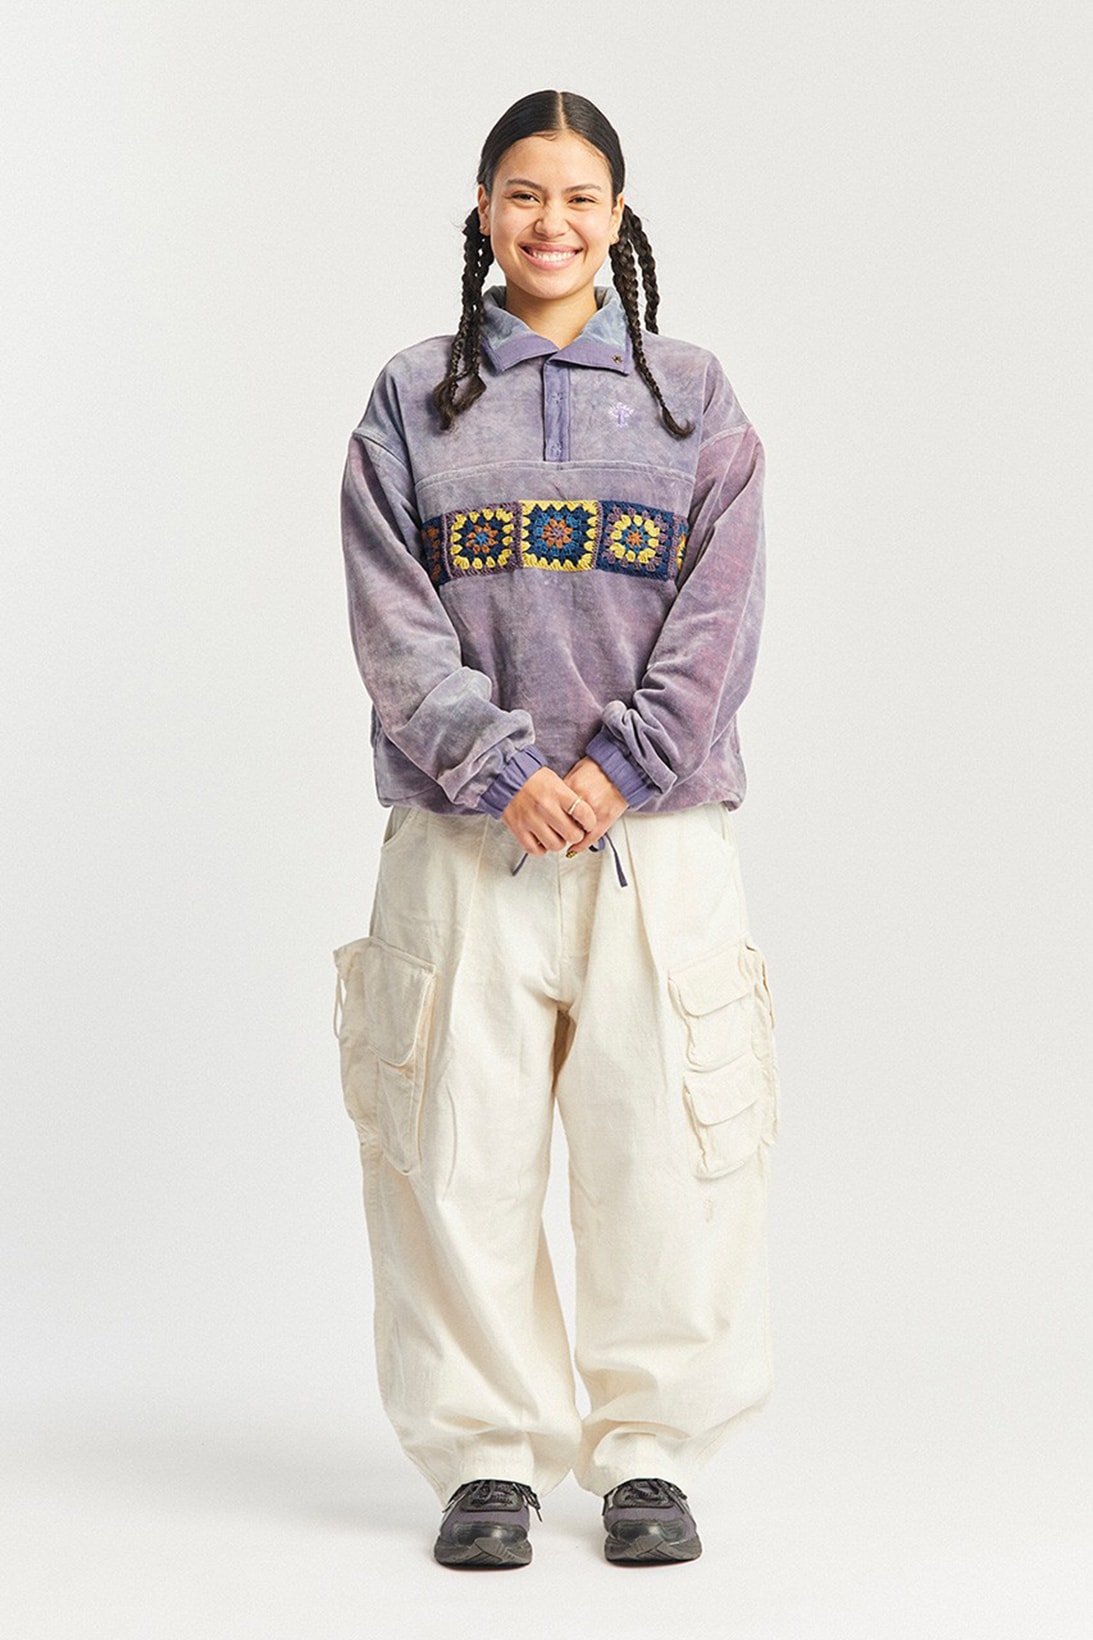 Story Mfg. Try Try Try Fall Winter Collection Lookbook Long Sleeve Shirt Pants Purple White